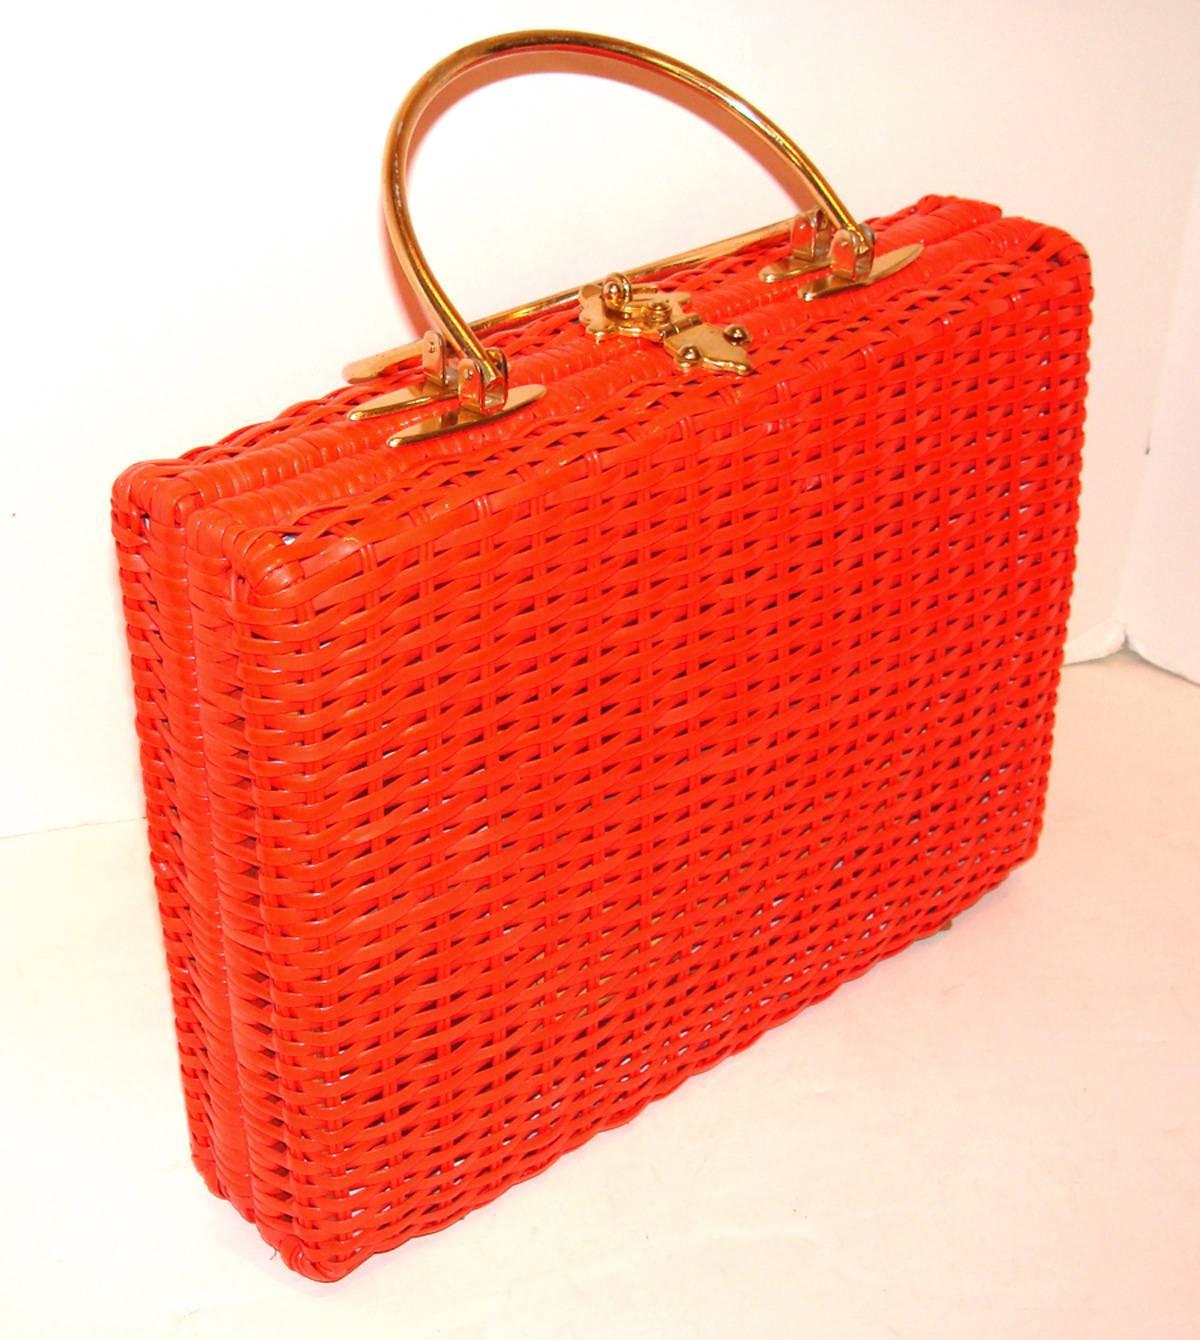 This is a great bag that is rarely seen.   The size is impressive and the color is fabulous.   The orange is a true deep orange (not reddish and not on the yellow side--totally orange).  The color is a vibrant neutral and can be paired with all